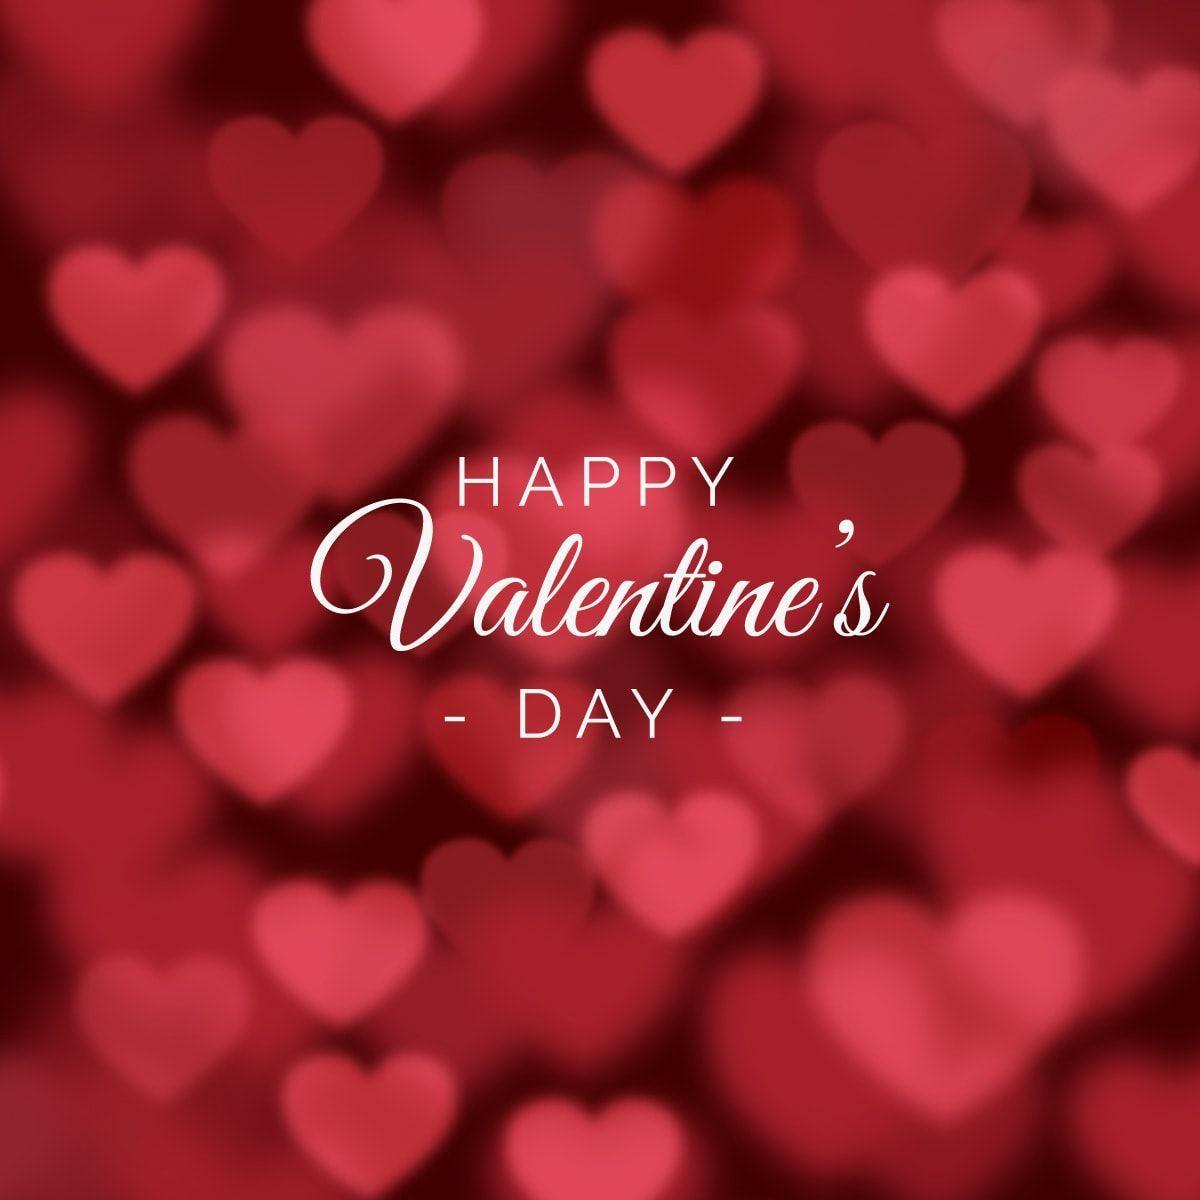 Happy Valentines Day Wallpaper. Happy valentines day picture, Happy valentine day quotes, Valentines day wishes